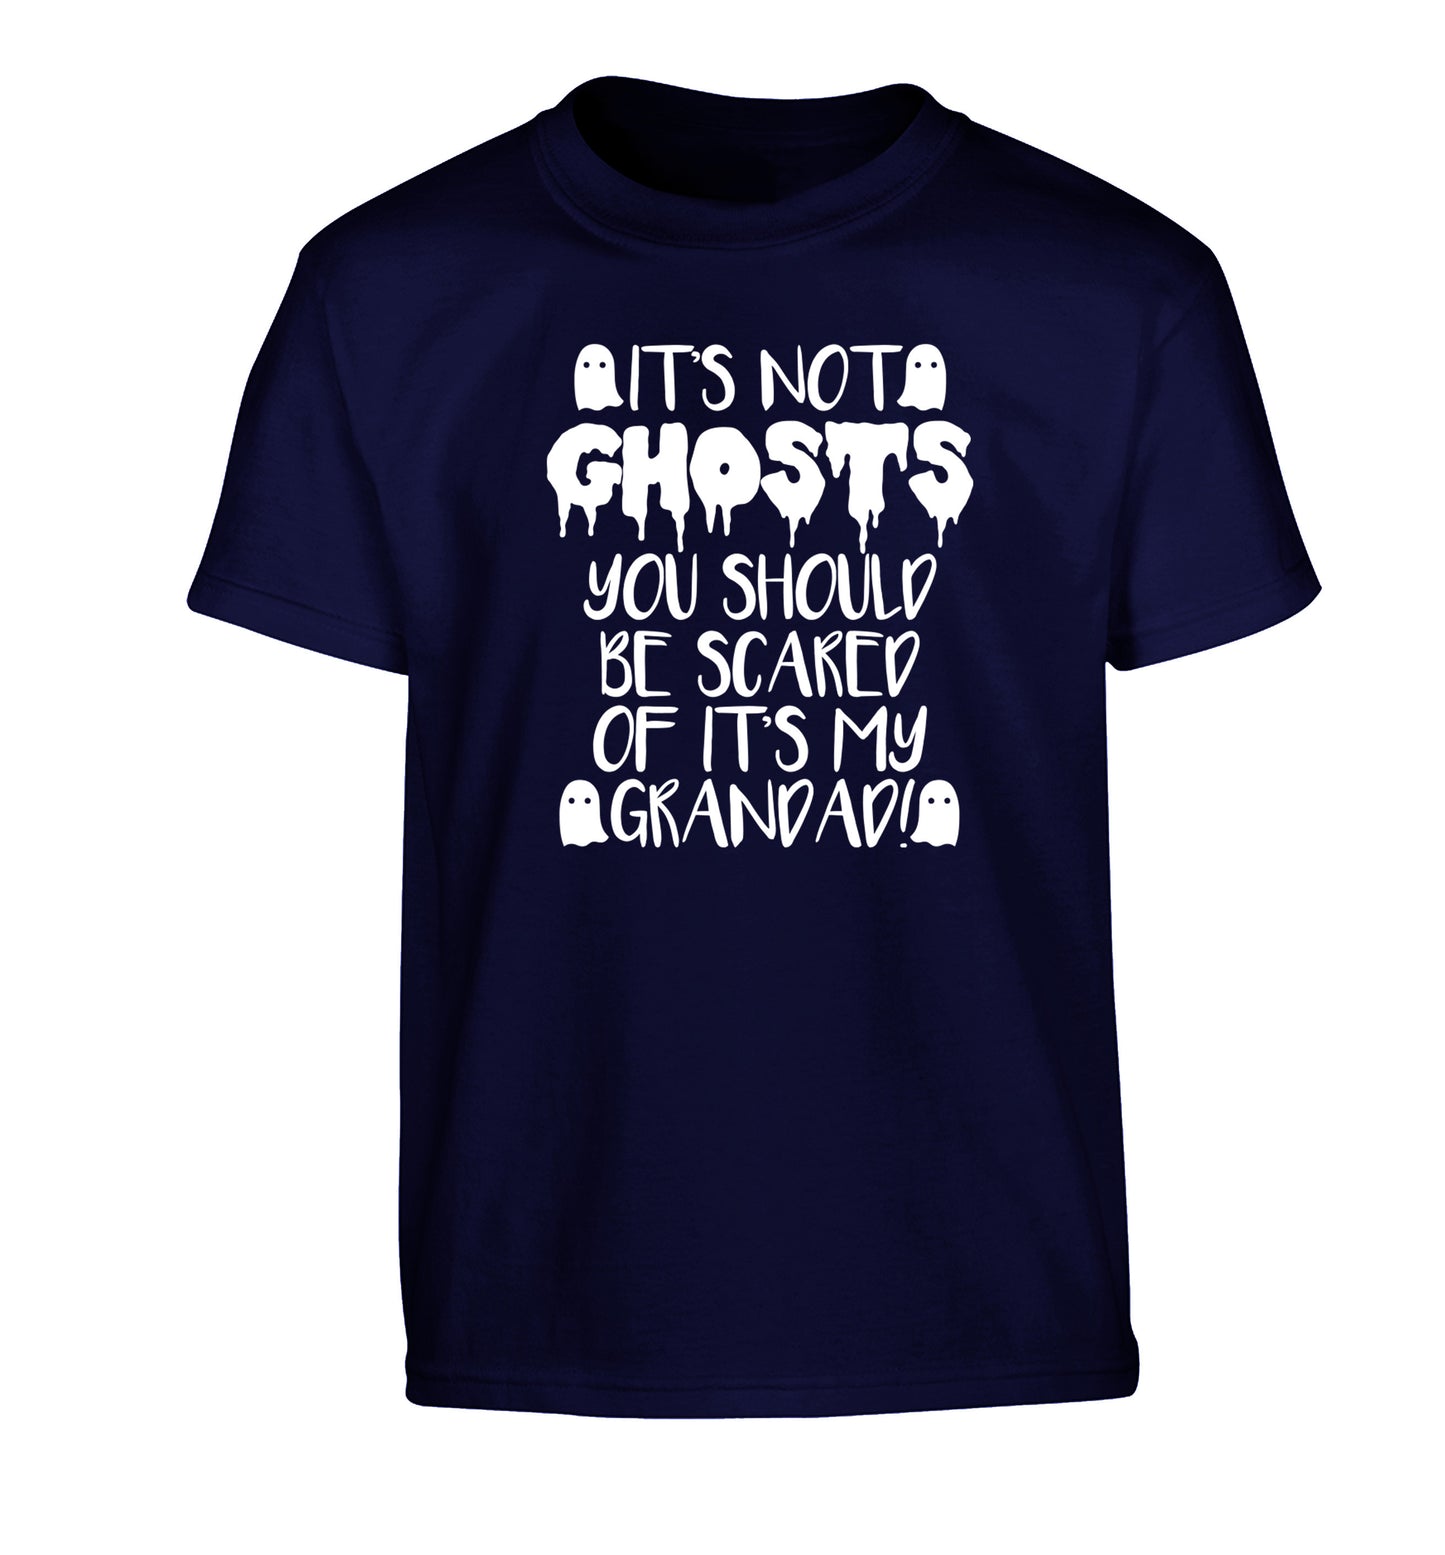 It's not ghosts you should be scared of it's my grandad! Children's navy Tshirt 12-14 Years